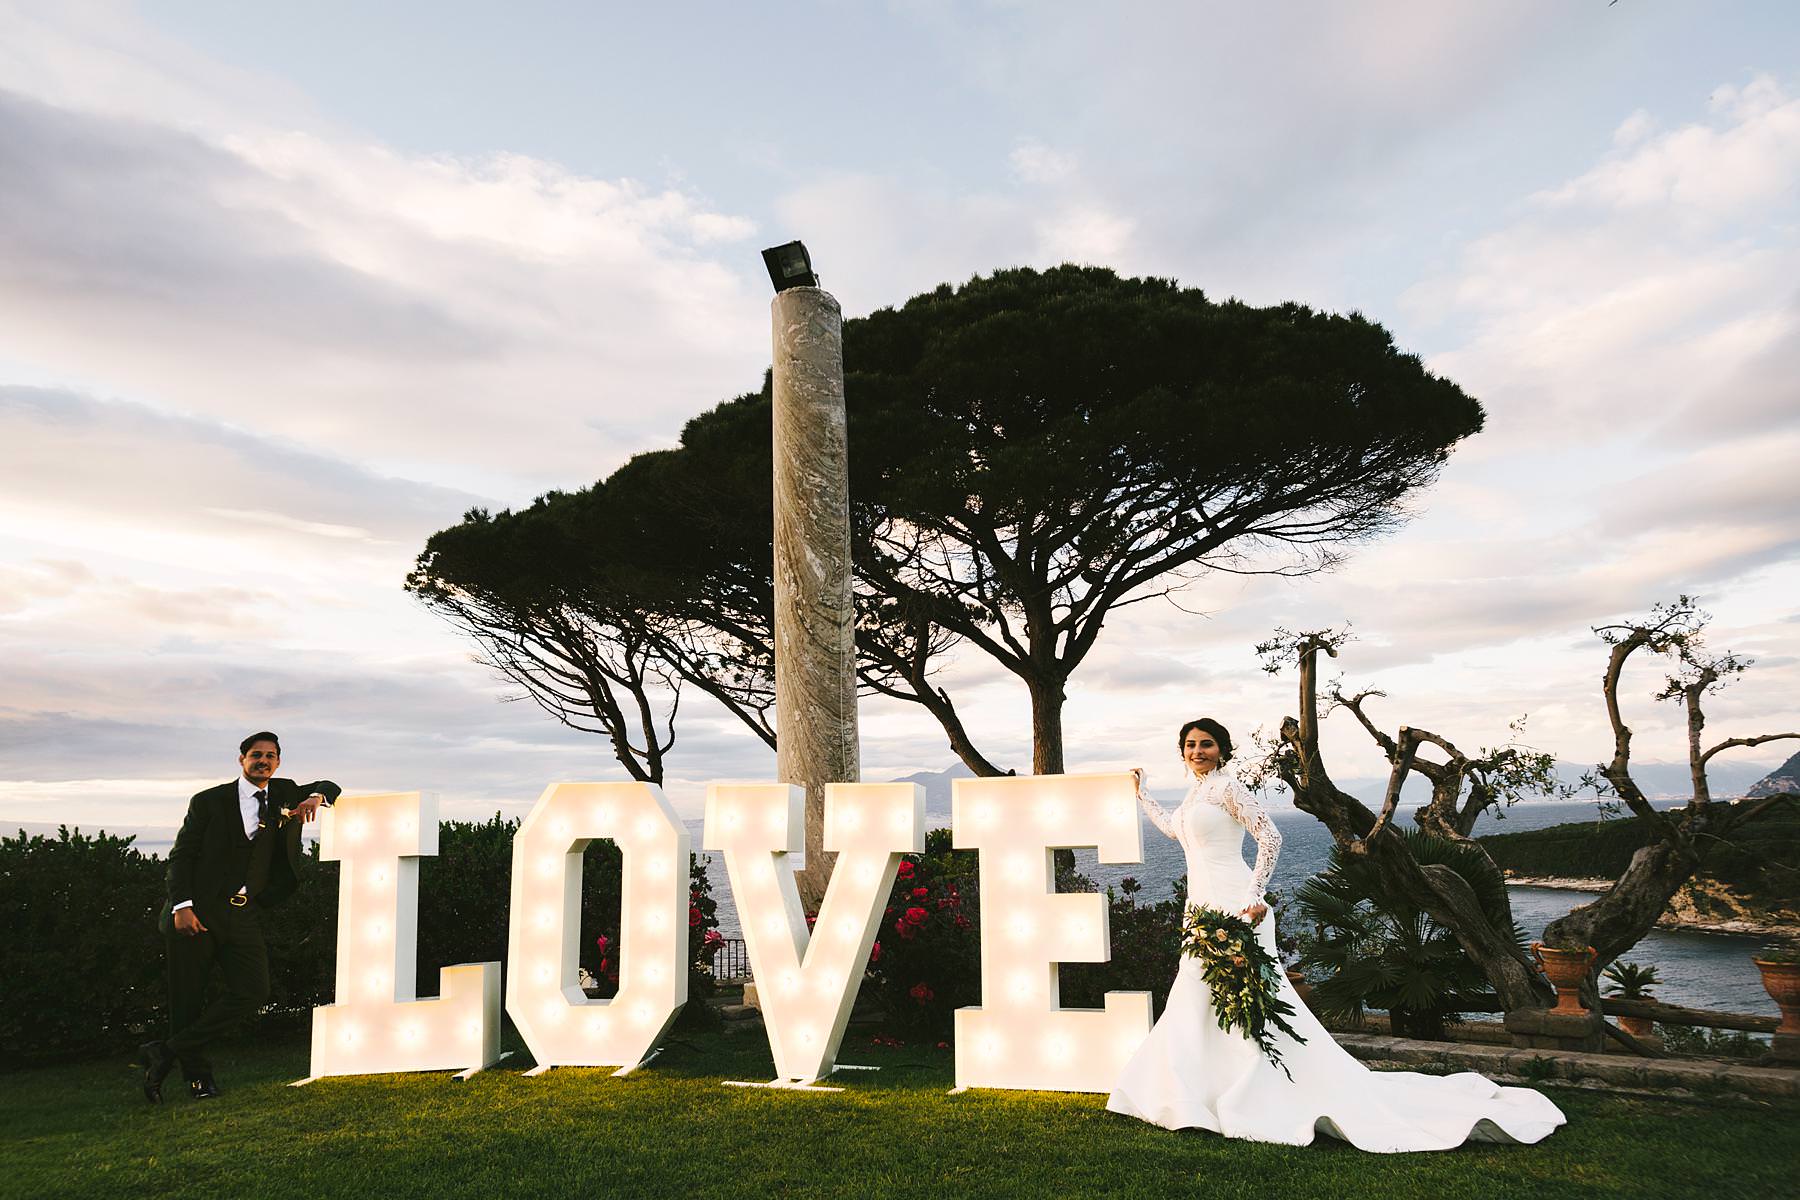 Amazing bride and groom portrait with the "love" sign at Villa Angelina venue